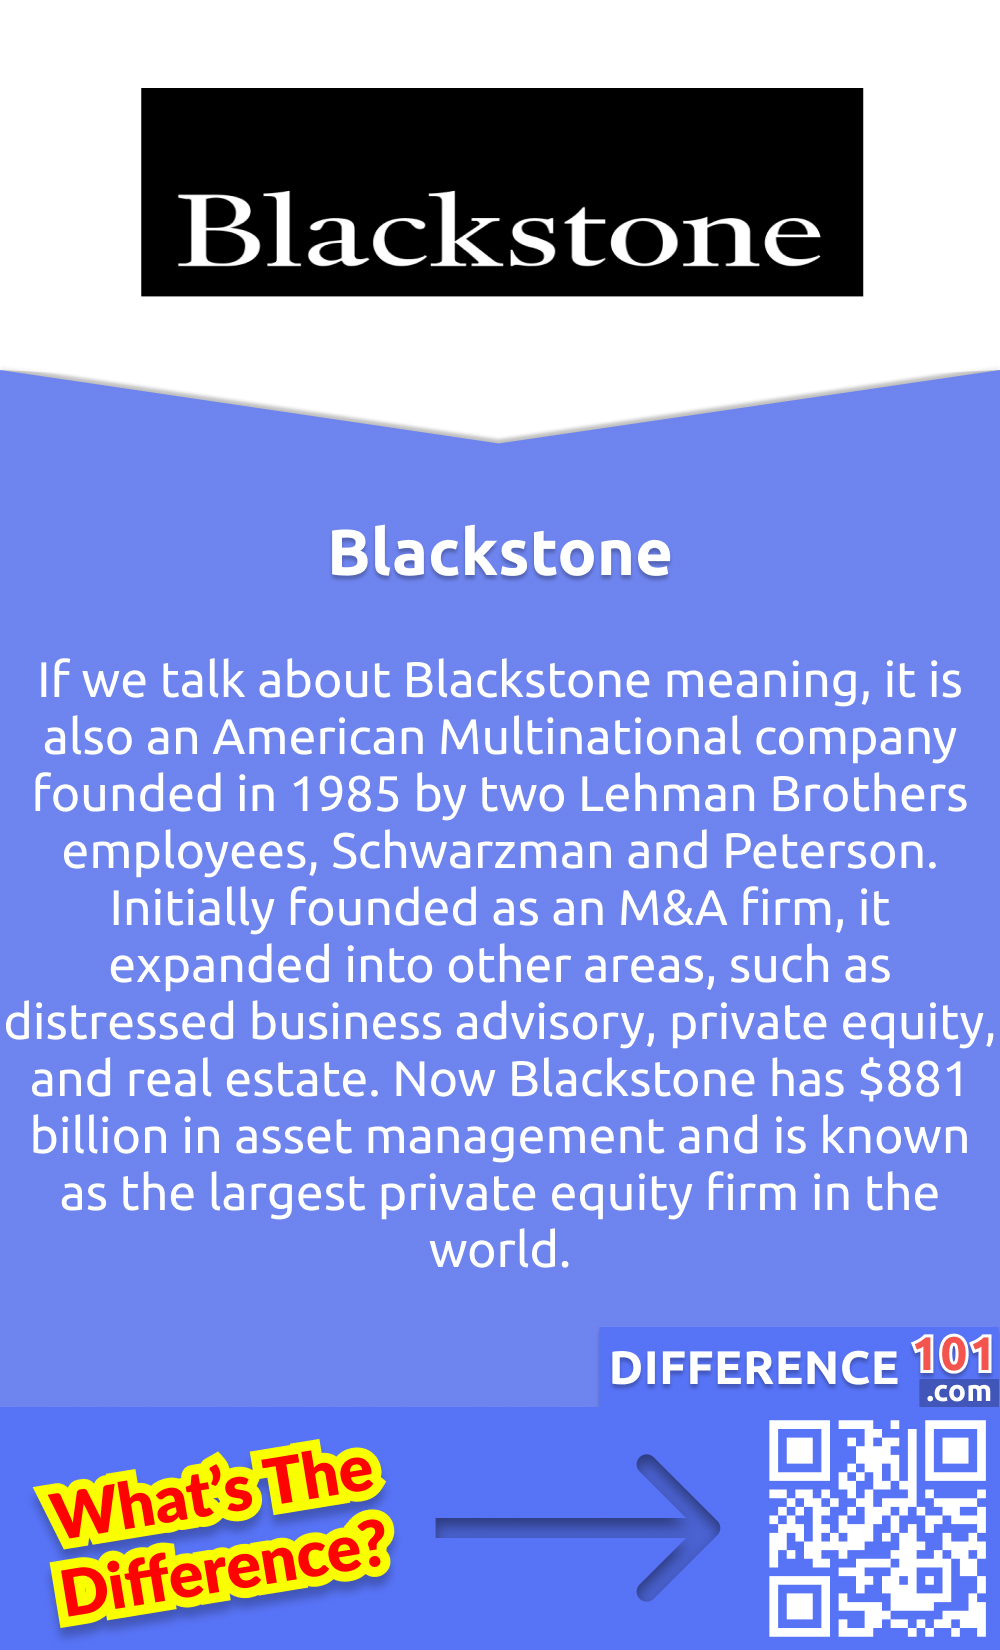 What is Blackstone? If we talk about Blackstone meaning, it is also an American Multinational company founded in 1985 by two Lehman Brothers employees, Schwarzman and Peterson. Initially founded as an M&A firm, it expanded into other areas, such as distressed business advisory, private equity, and real estate. Now Blackstone has $881 billion in asset management and is known as the largest private equity firm in the world. Blackstone investment aims to build a successful business with stronger communities and economic growth. However, this company has been criticized due to its connections with firms regarding the deforestation of the Amazon forest. Moreover, this company also has fewer employees as compared to BlackRock, which makes it smaller than that. But BlackRock does not beat it in capitalization, the primary criterion for the strength of a company.